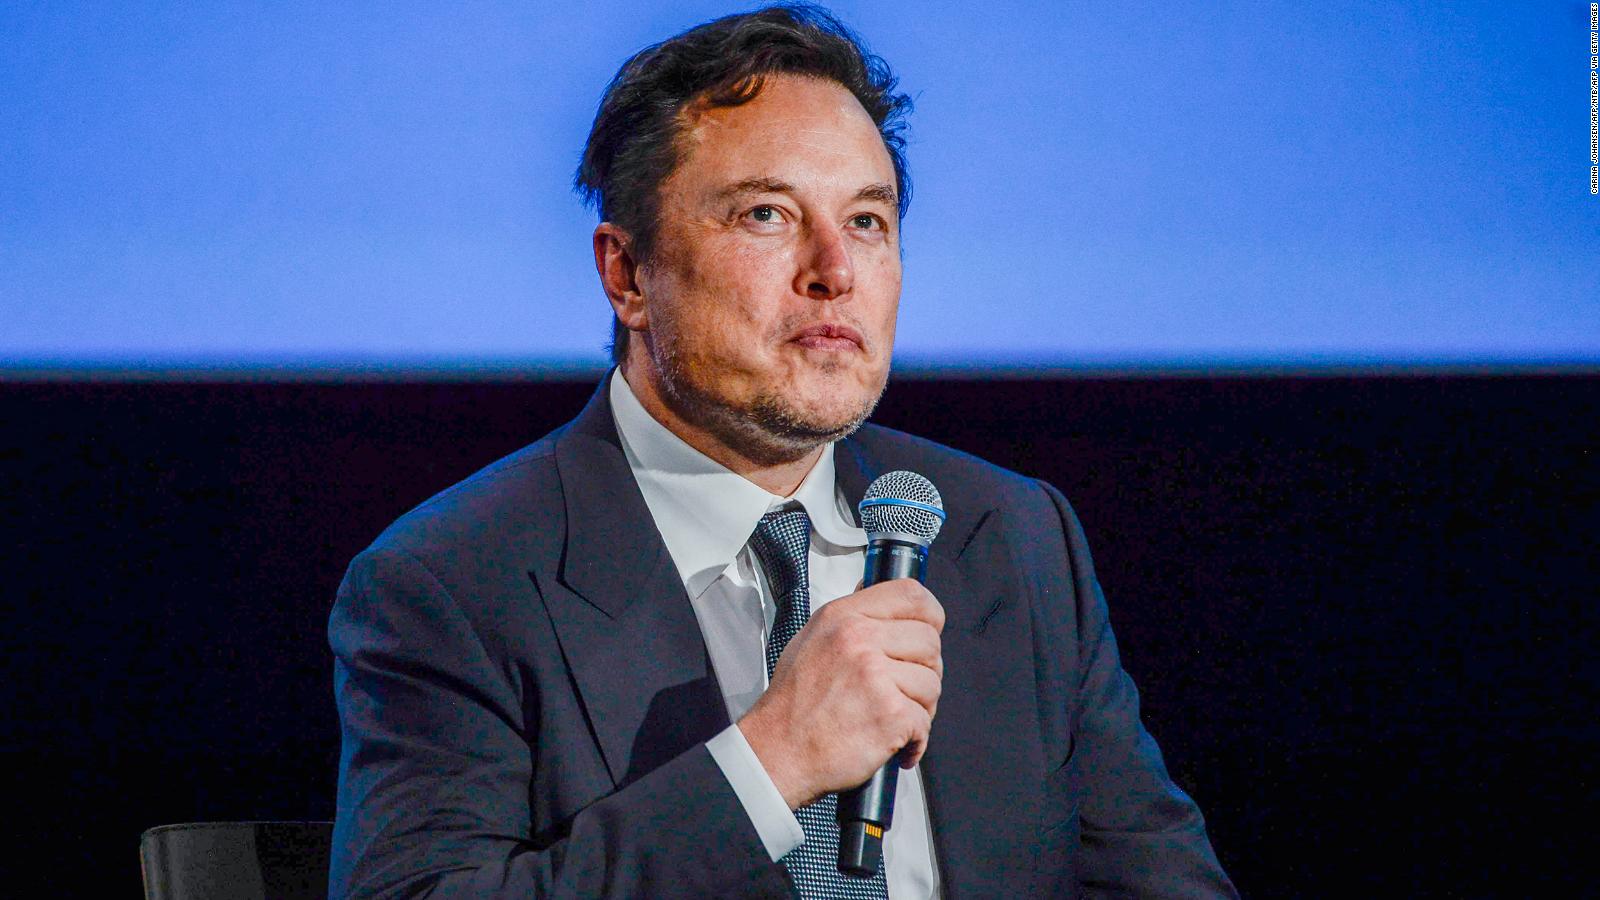 Elon Musk says he doesn’t want Twitter to become a ‘borderless hell’